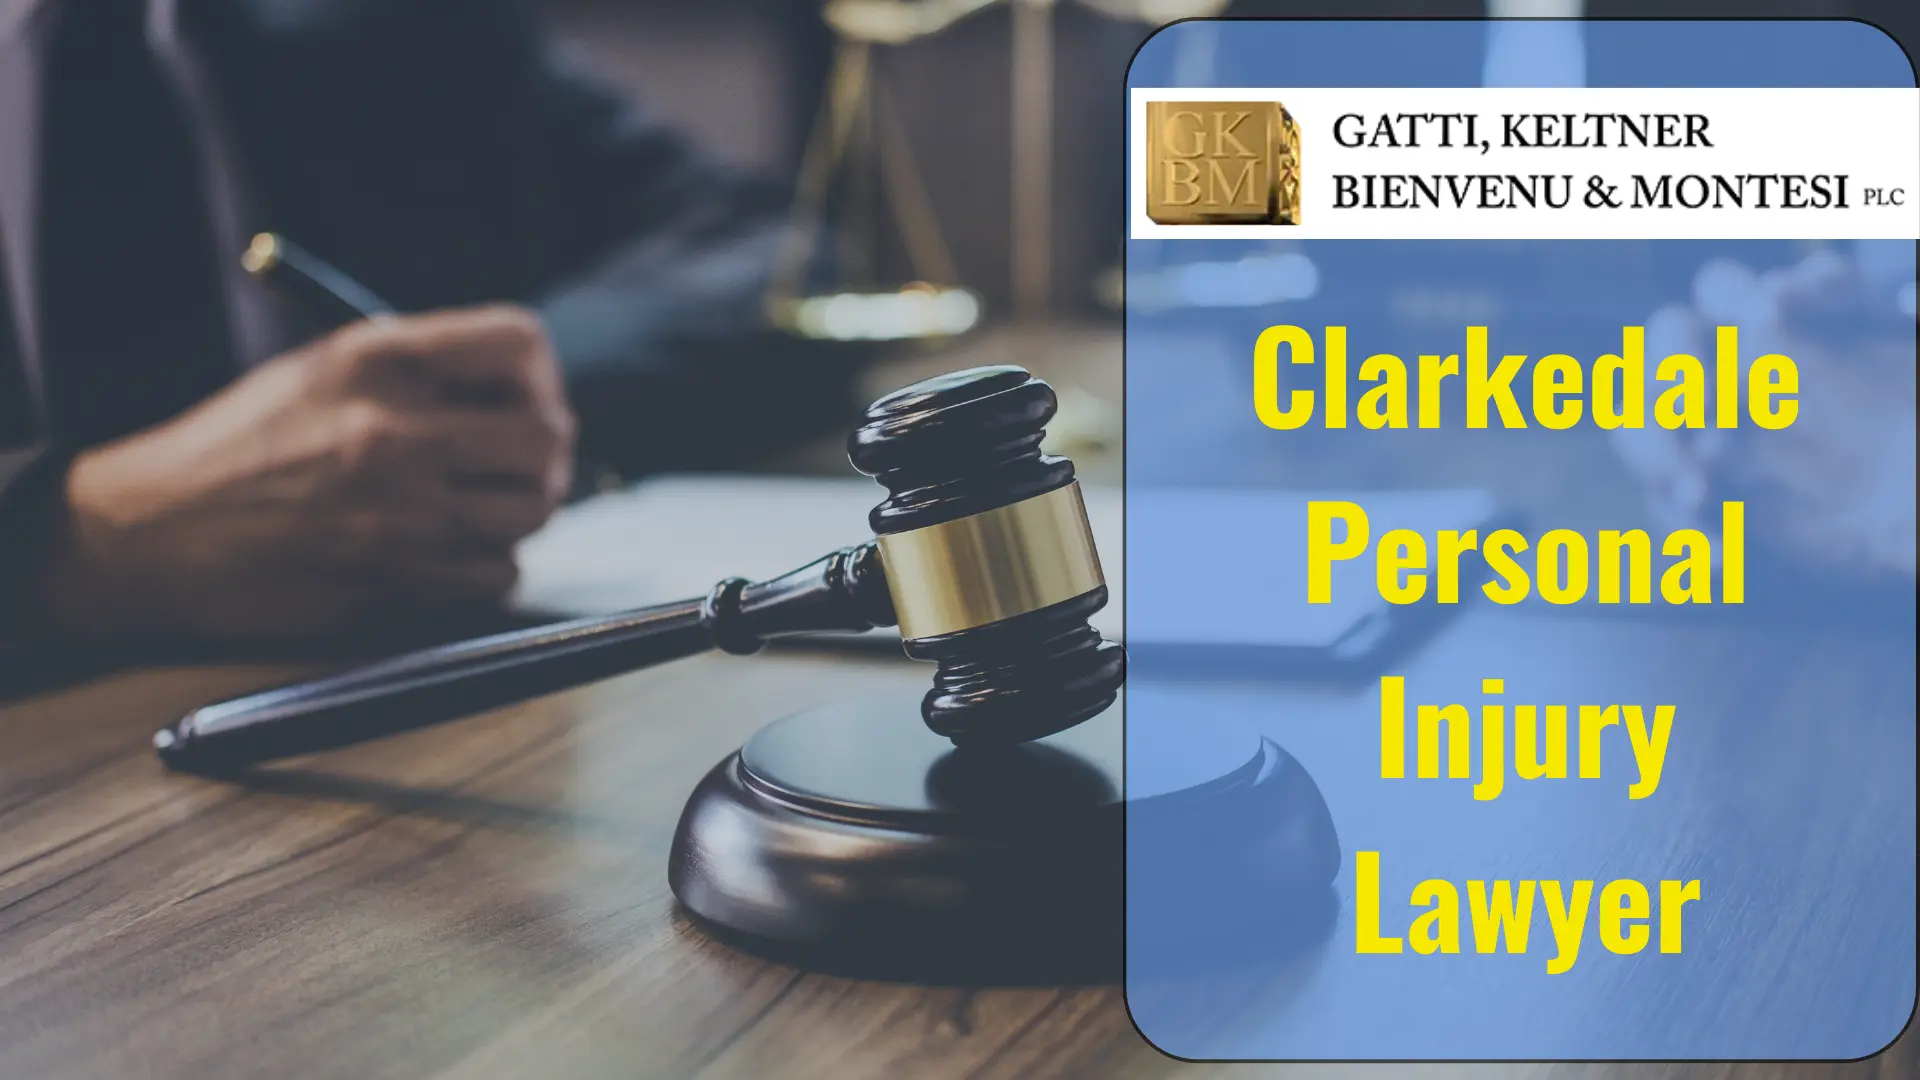 Clarkedale Personal Injury Lawyer